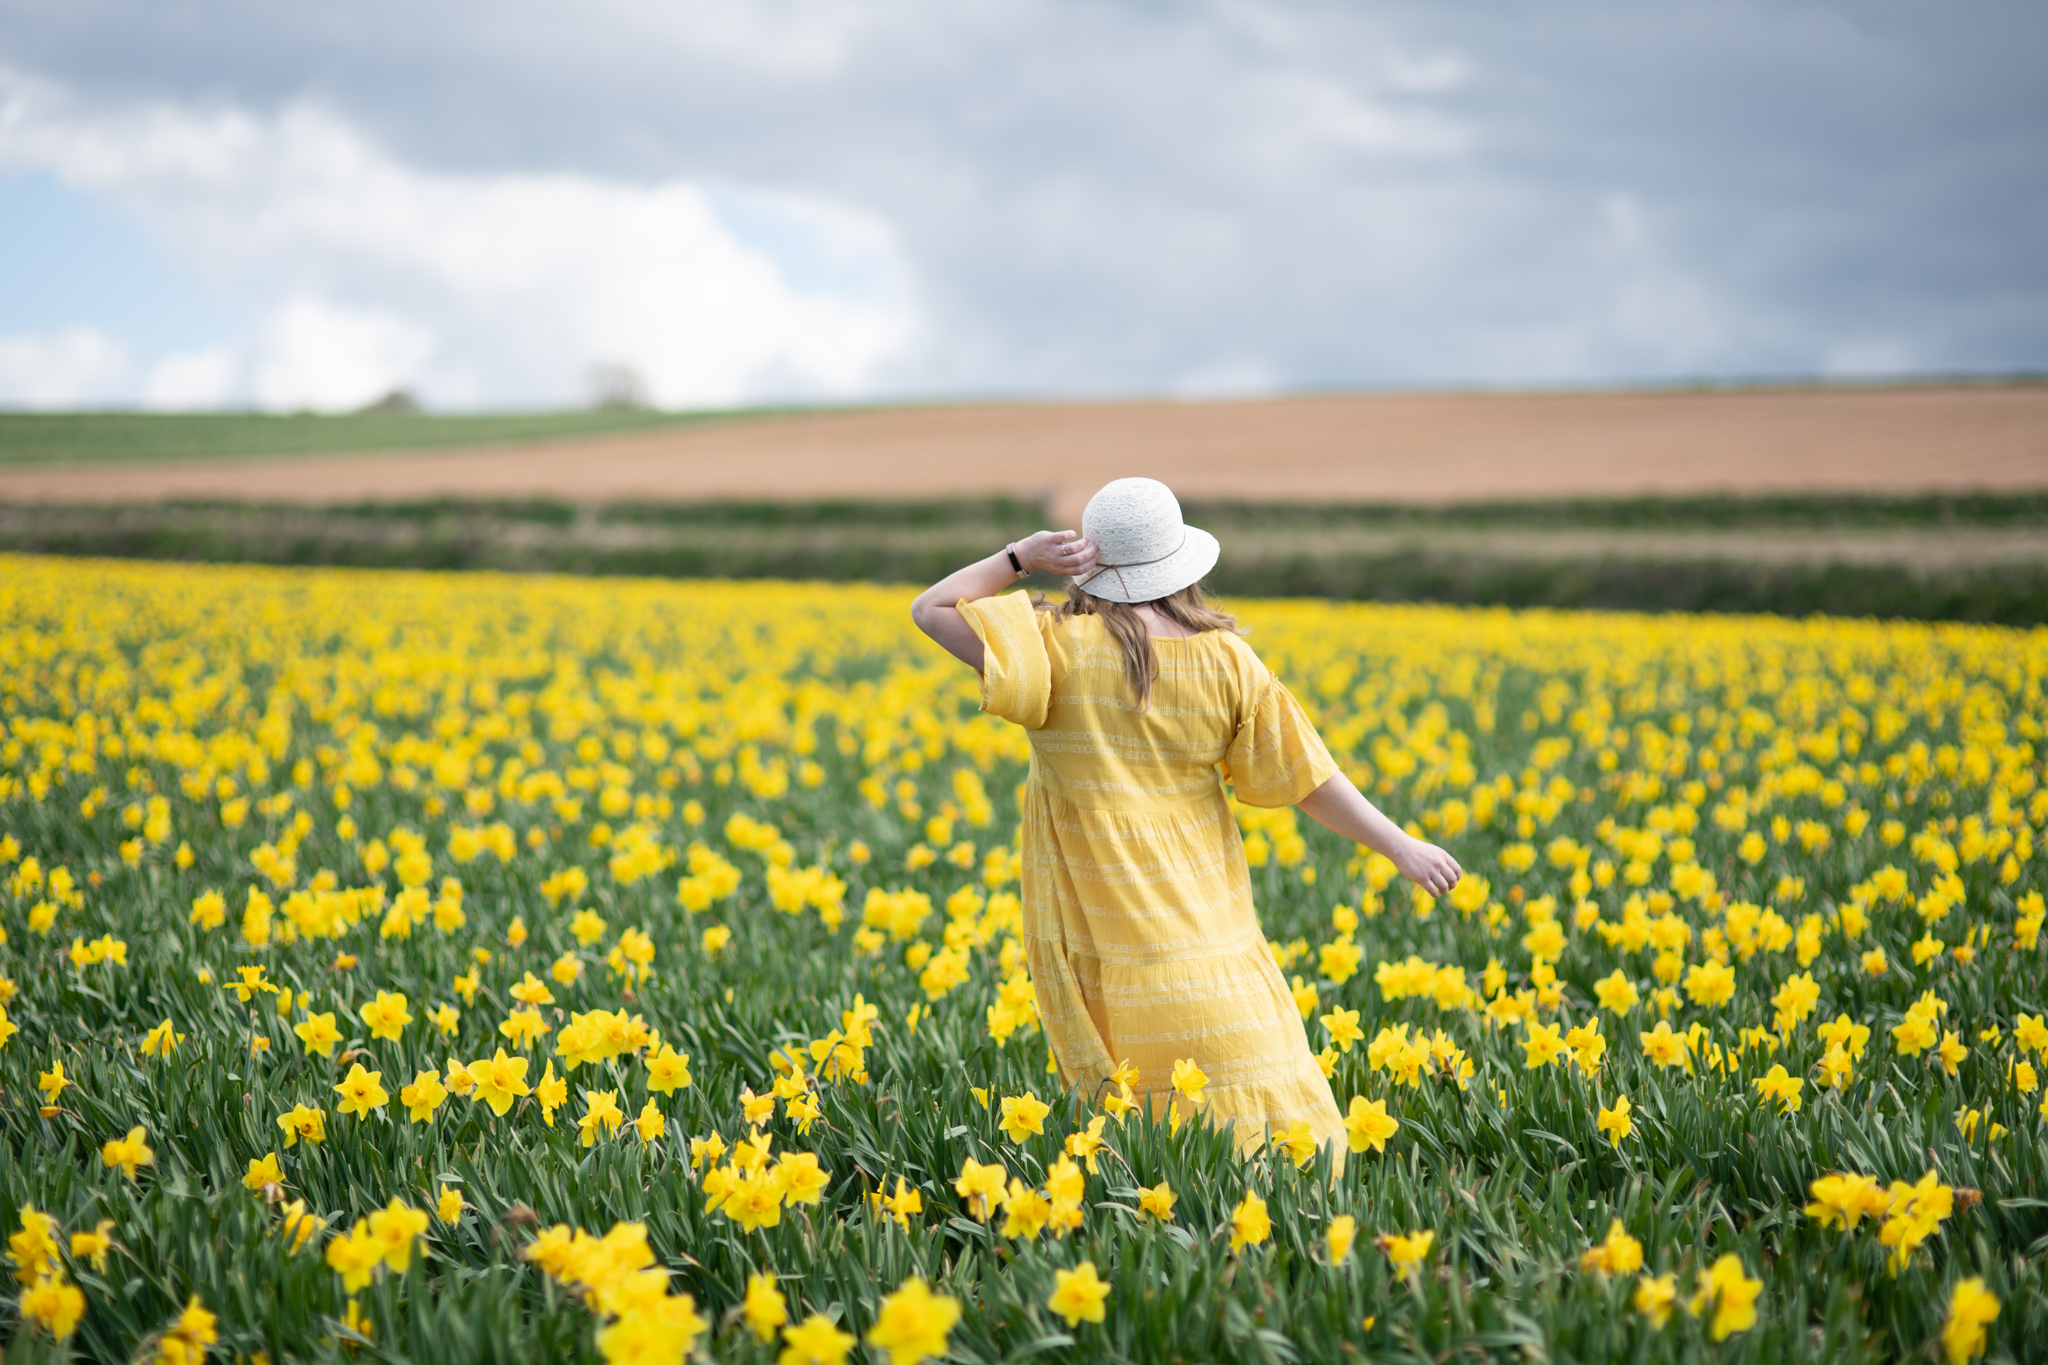 Over 40 fashion blogger in a yellow summer dress in a field of daffodils